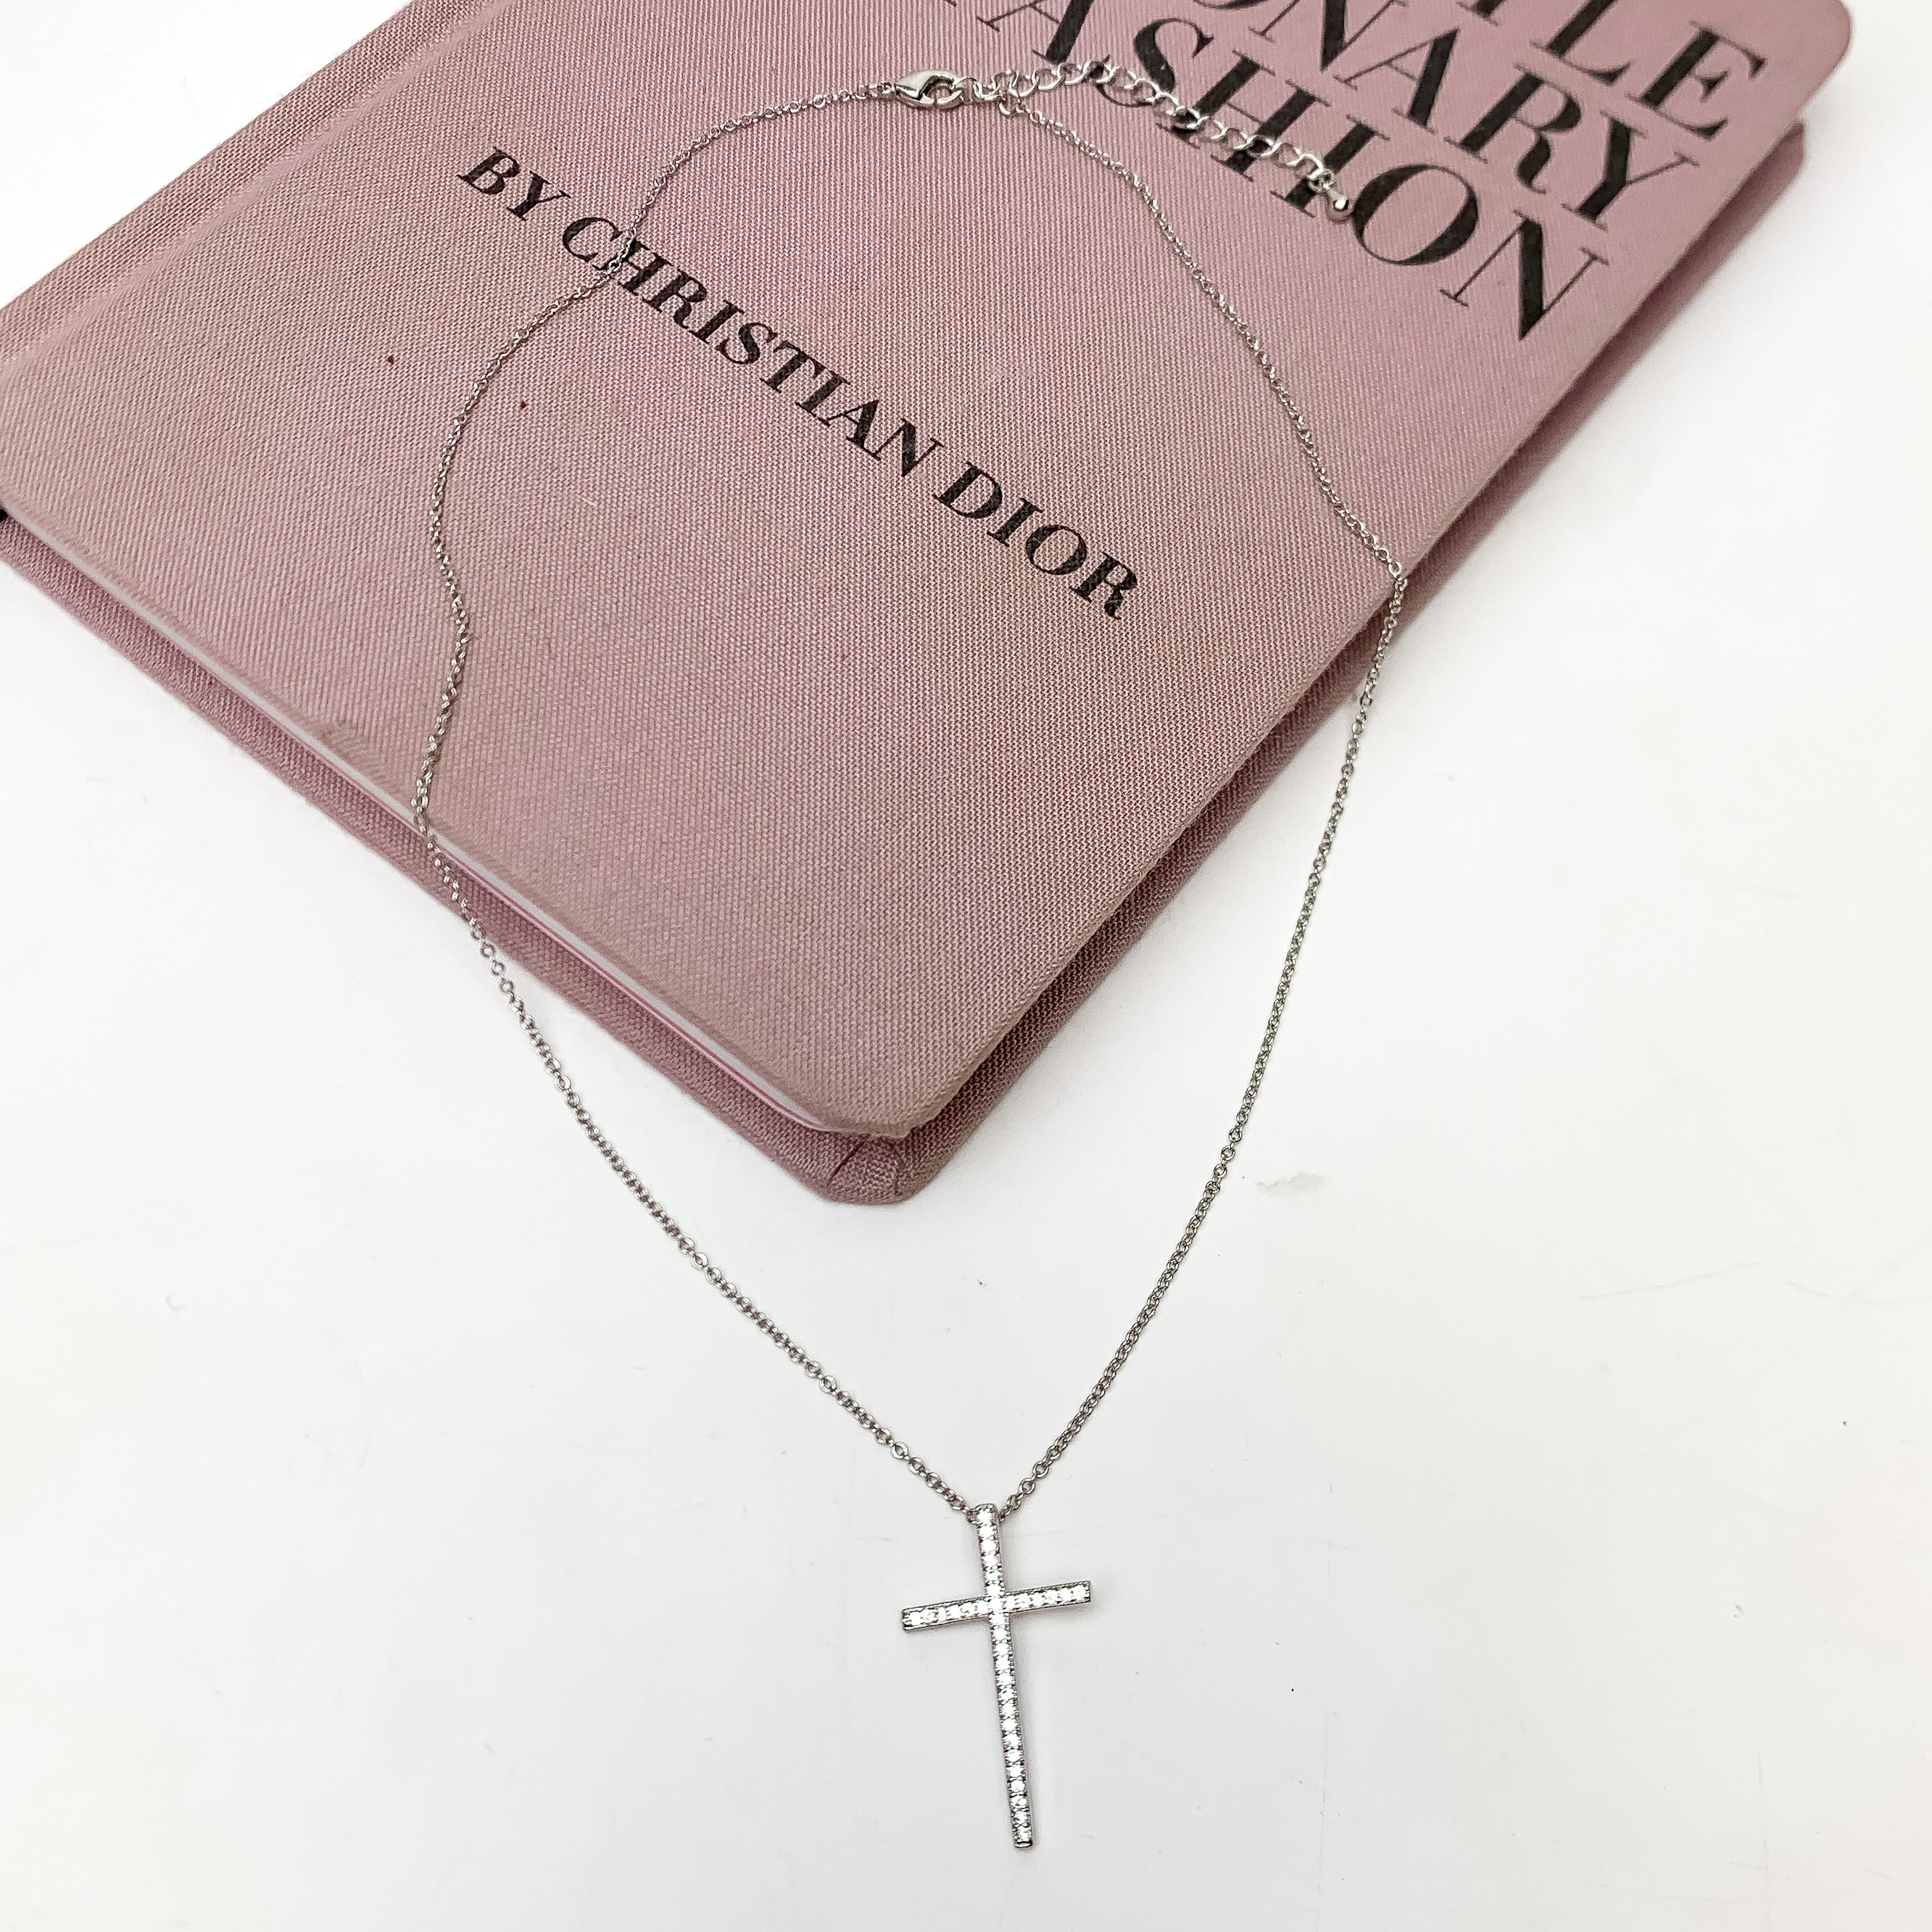 Silver Tone Chain Necklace With Clear Crystal Cross. This necklace is pictured on a white background with part of it on a pink book.